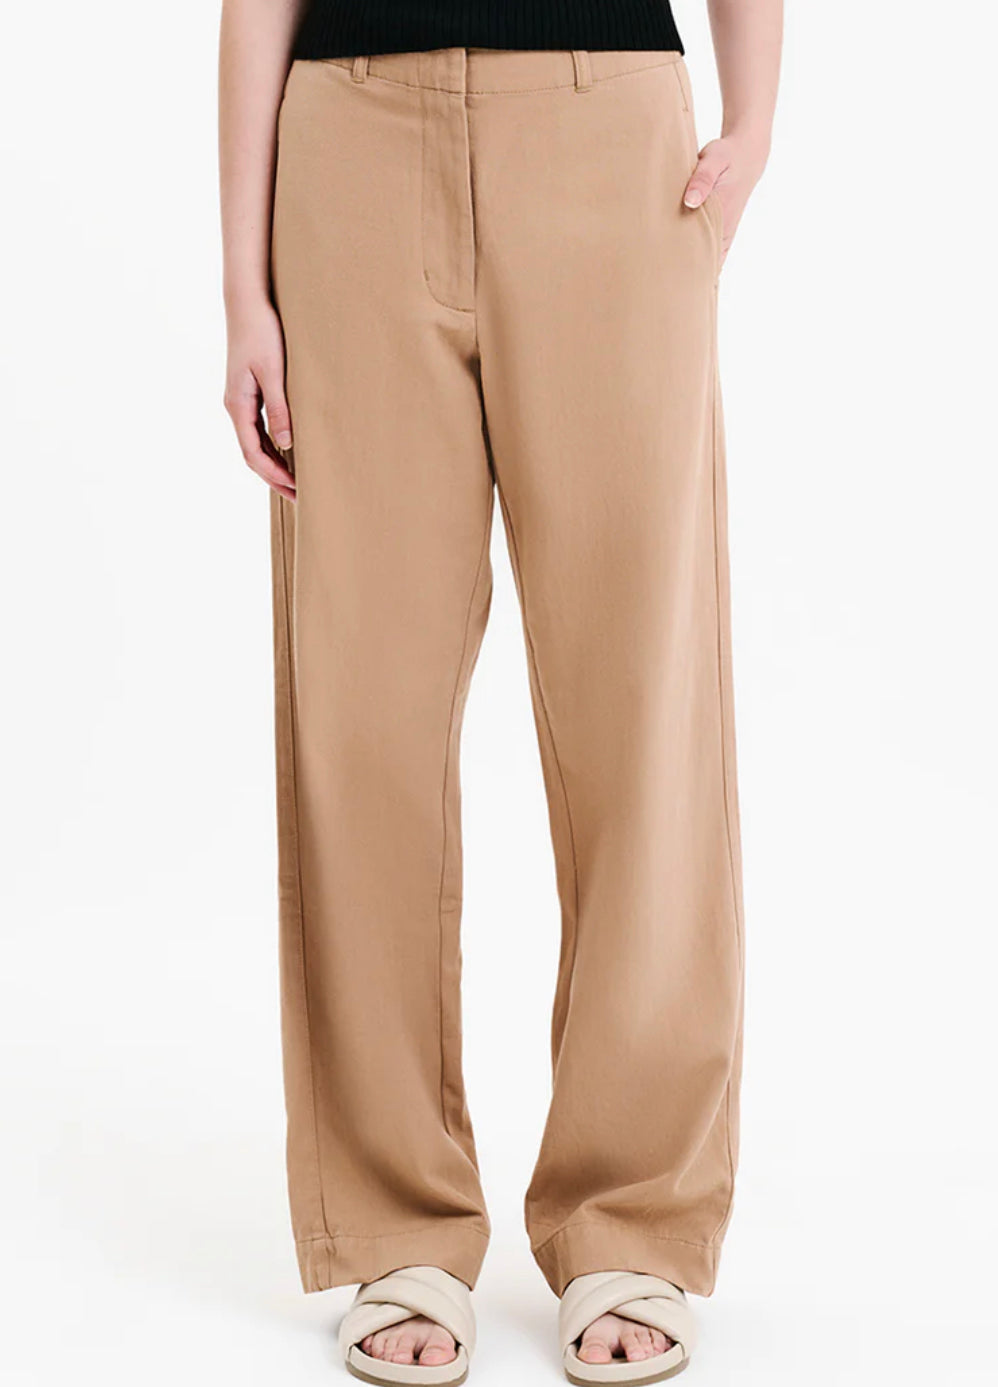 Nude Lucy Mirri Pant - The Ceres Linen Pant - Sesame